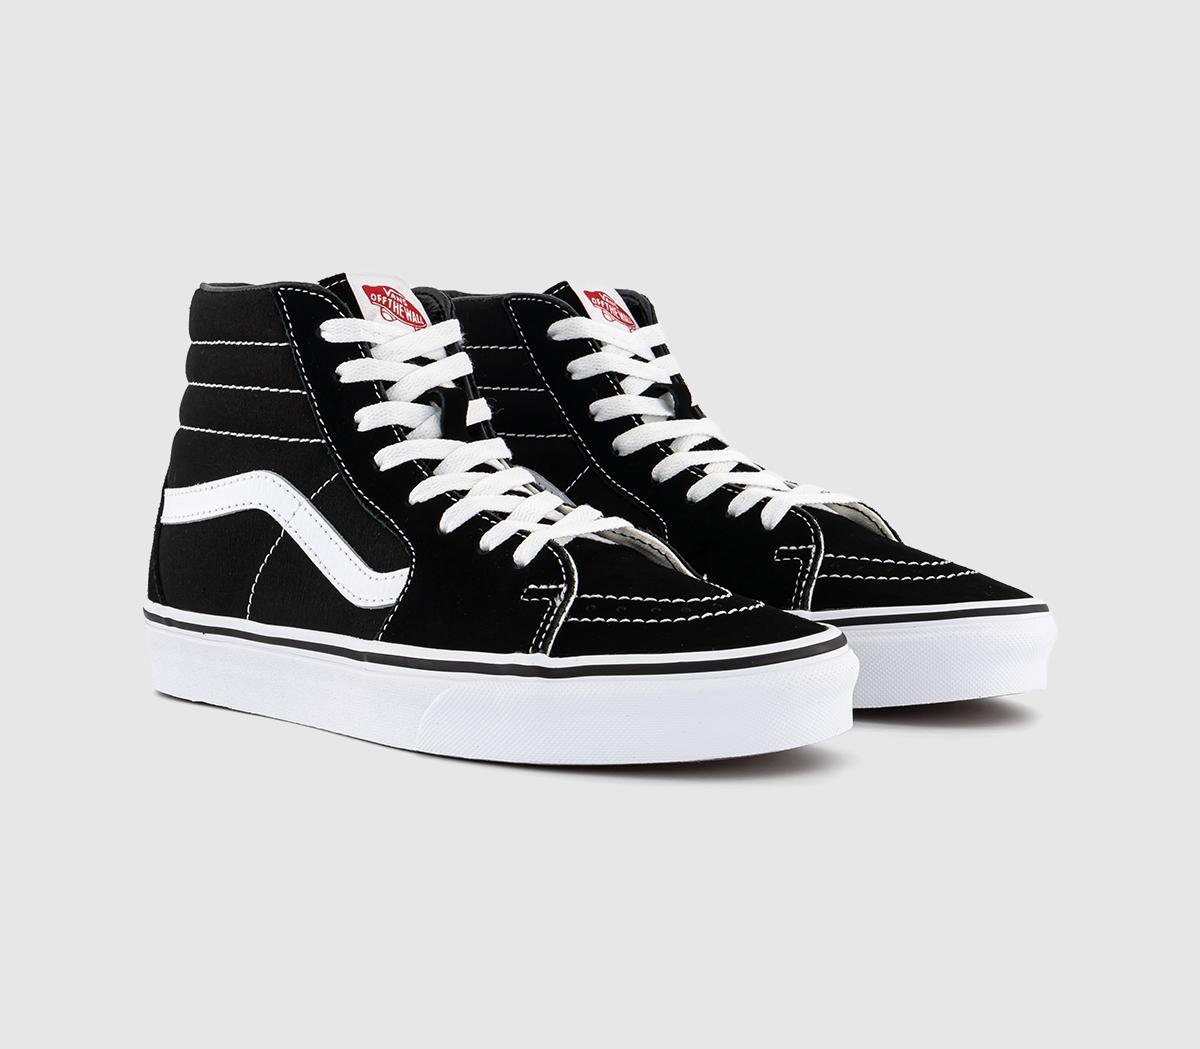 Vans Womens Sk8 Hi Canvas Trainers In Black And White, 6